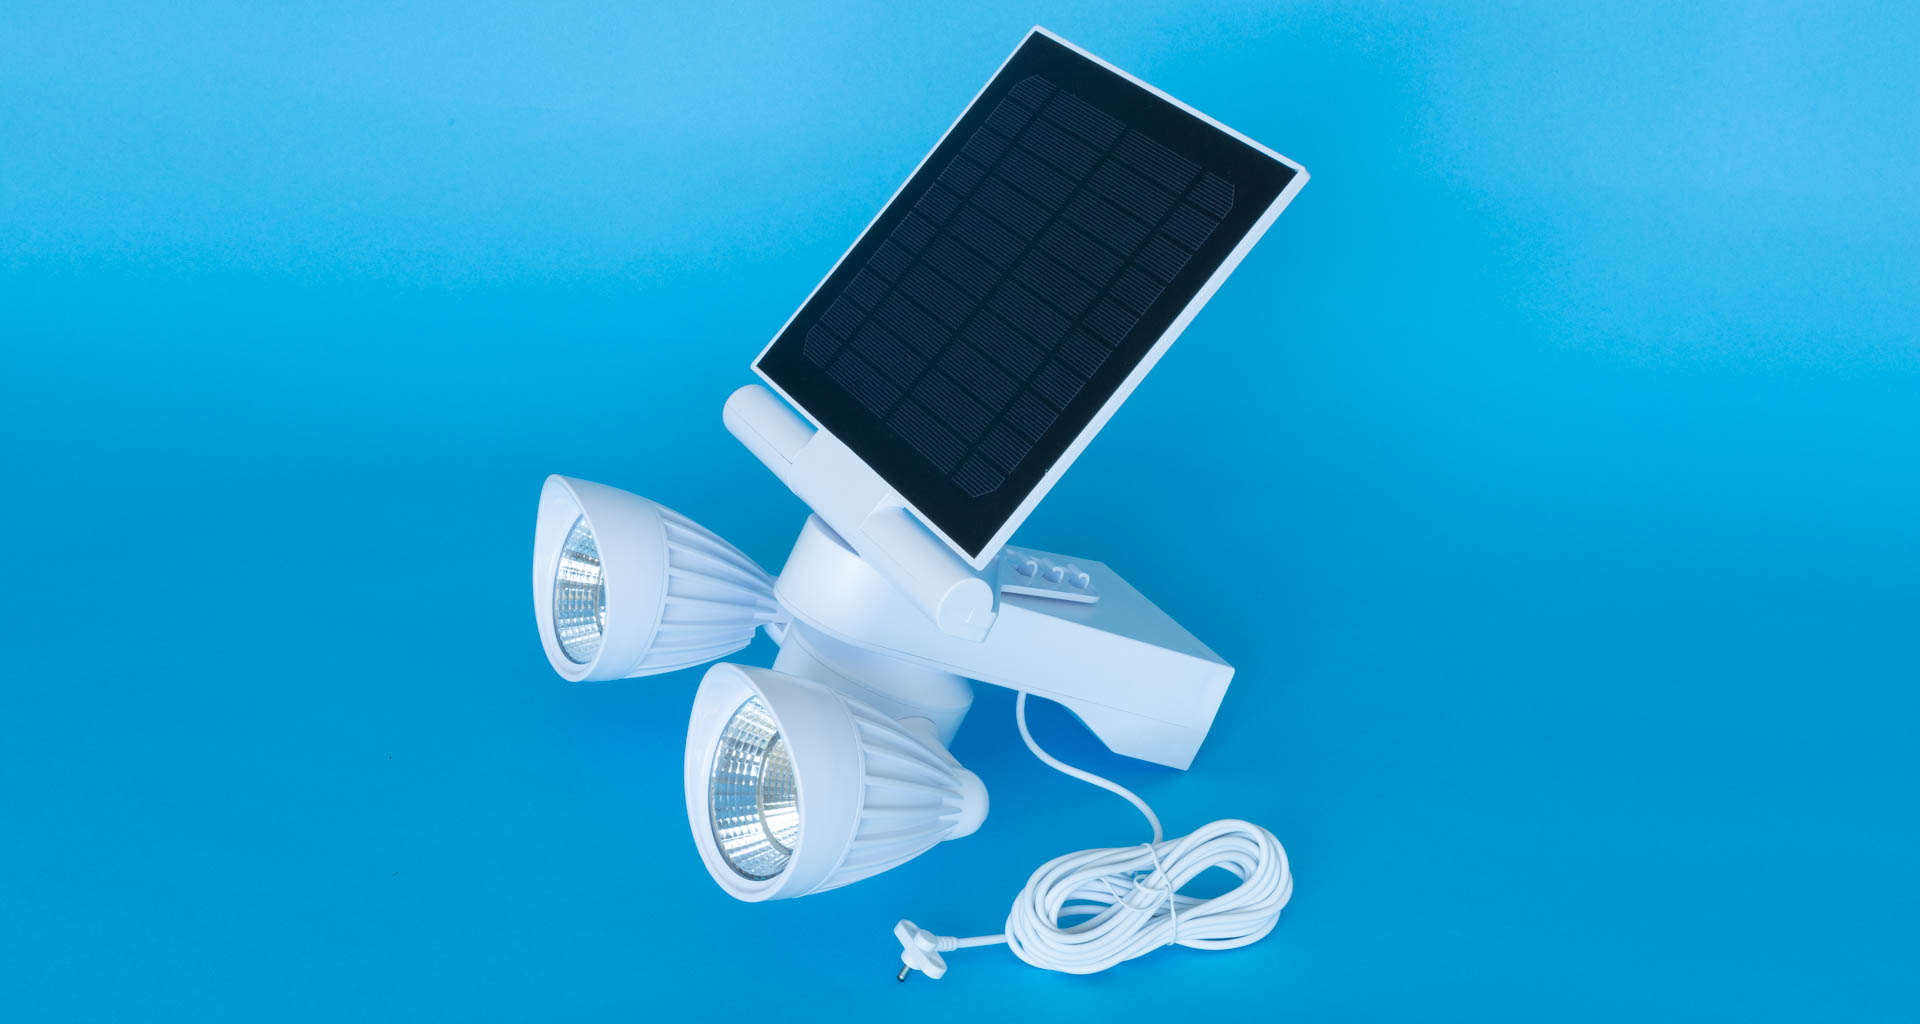 Wasserstein Ring Floodlight & Solar Panel Charger as it comes out of the box. Image: Digitized House.